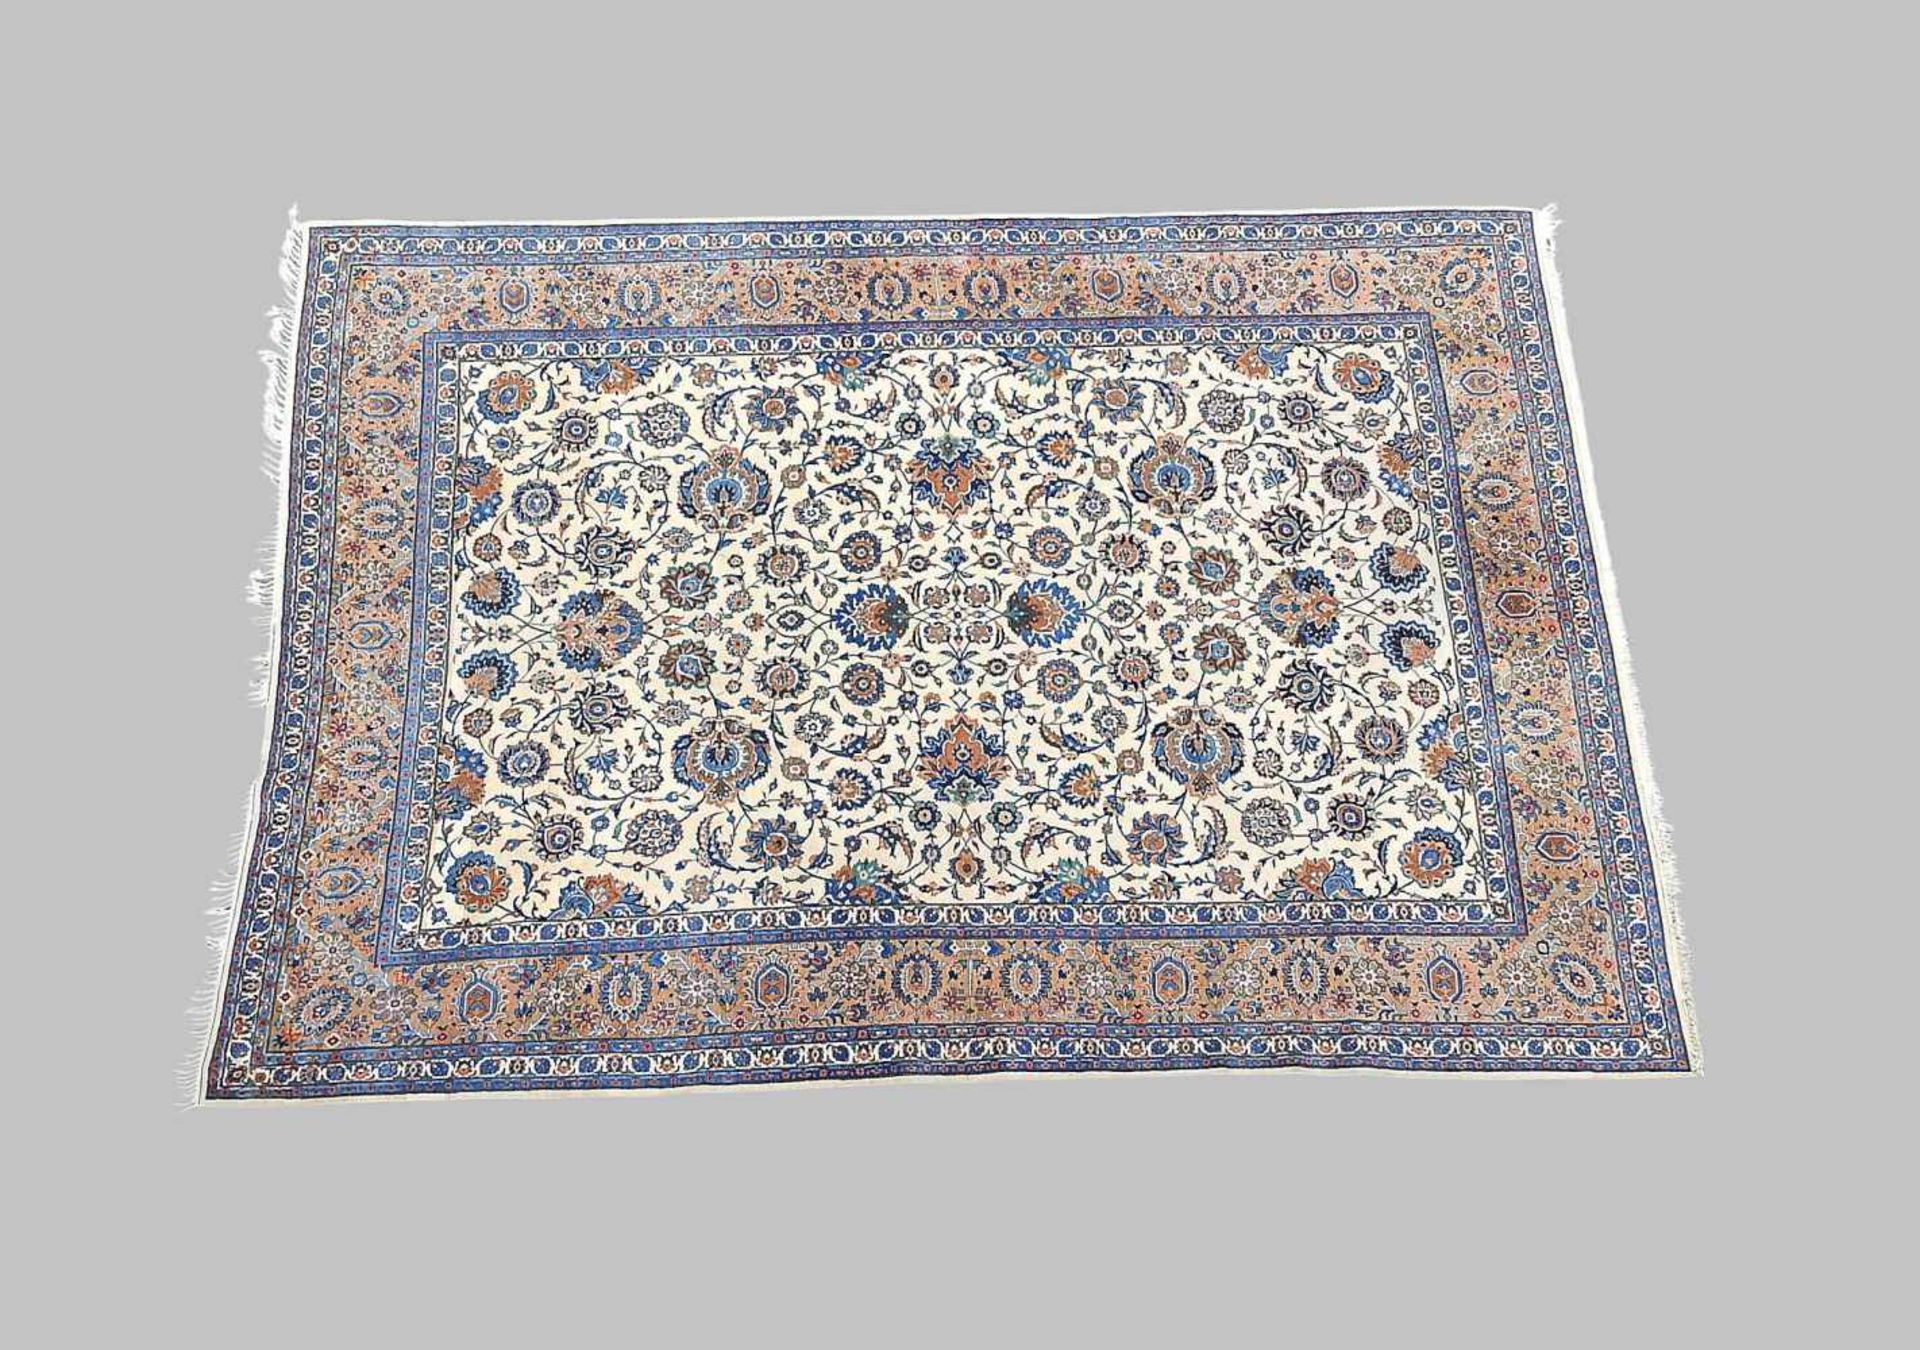 Isfahan TeppichIsfahan Teppich in sehr schöner Farbe. H x B ca. 382 x 265 cm- - -23.00 % buyer's